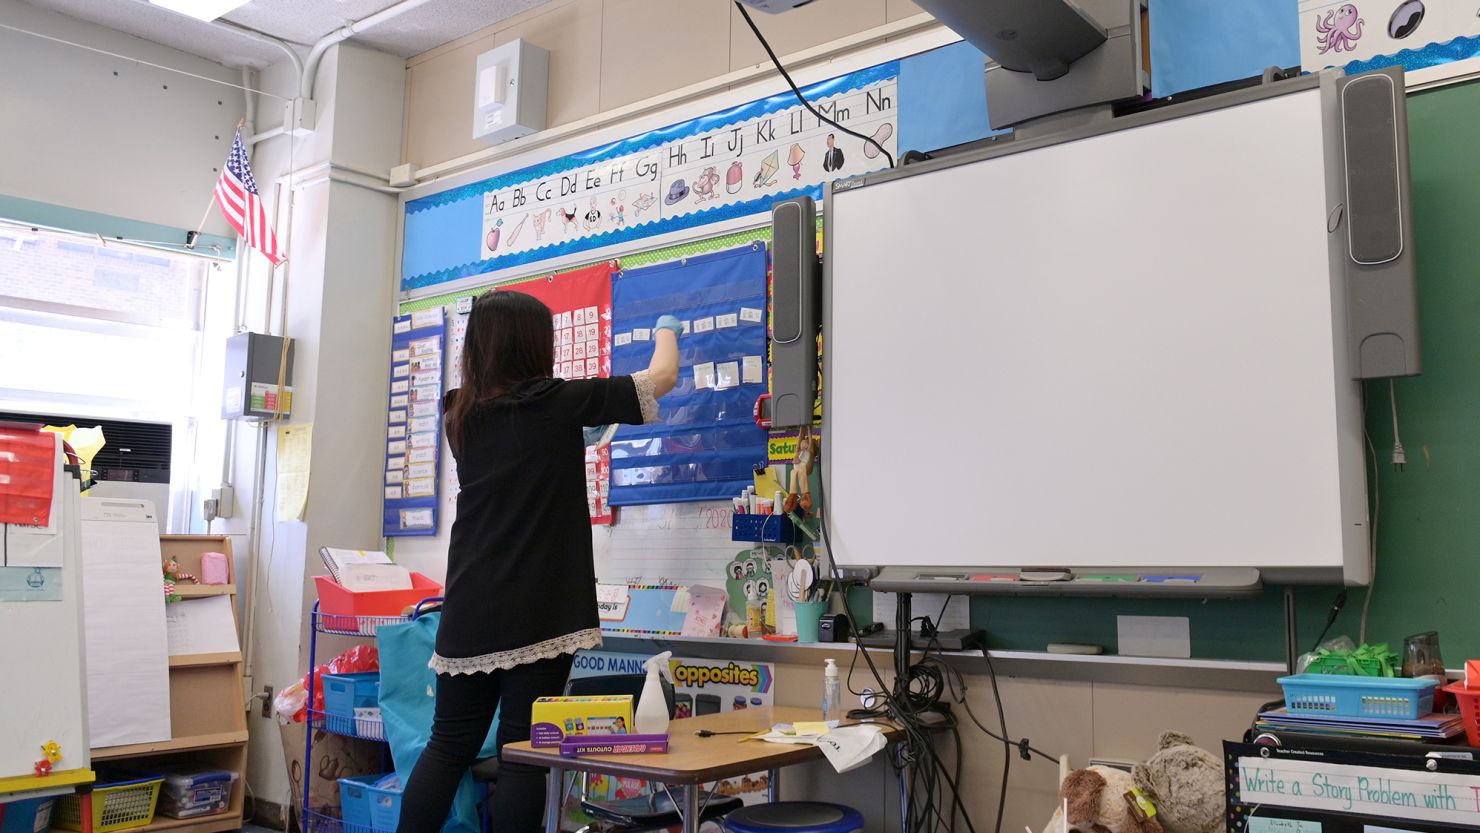 A teacher collects supplies needed to continue remote teaching through the end of the school year at Yung Wing School P.S. 124 on May 14, 2020 in New York City.